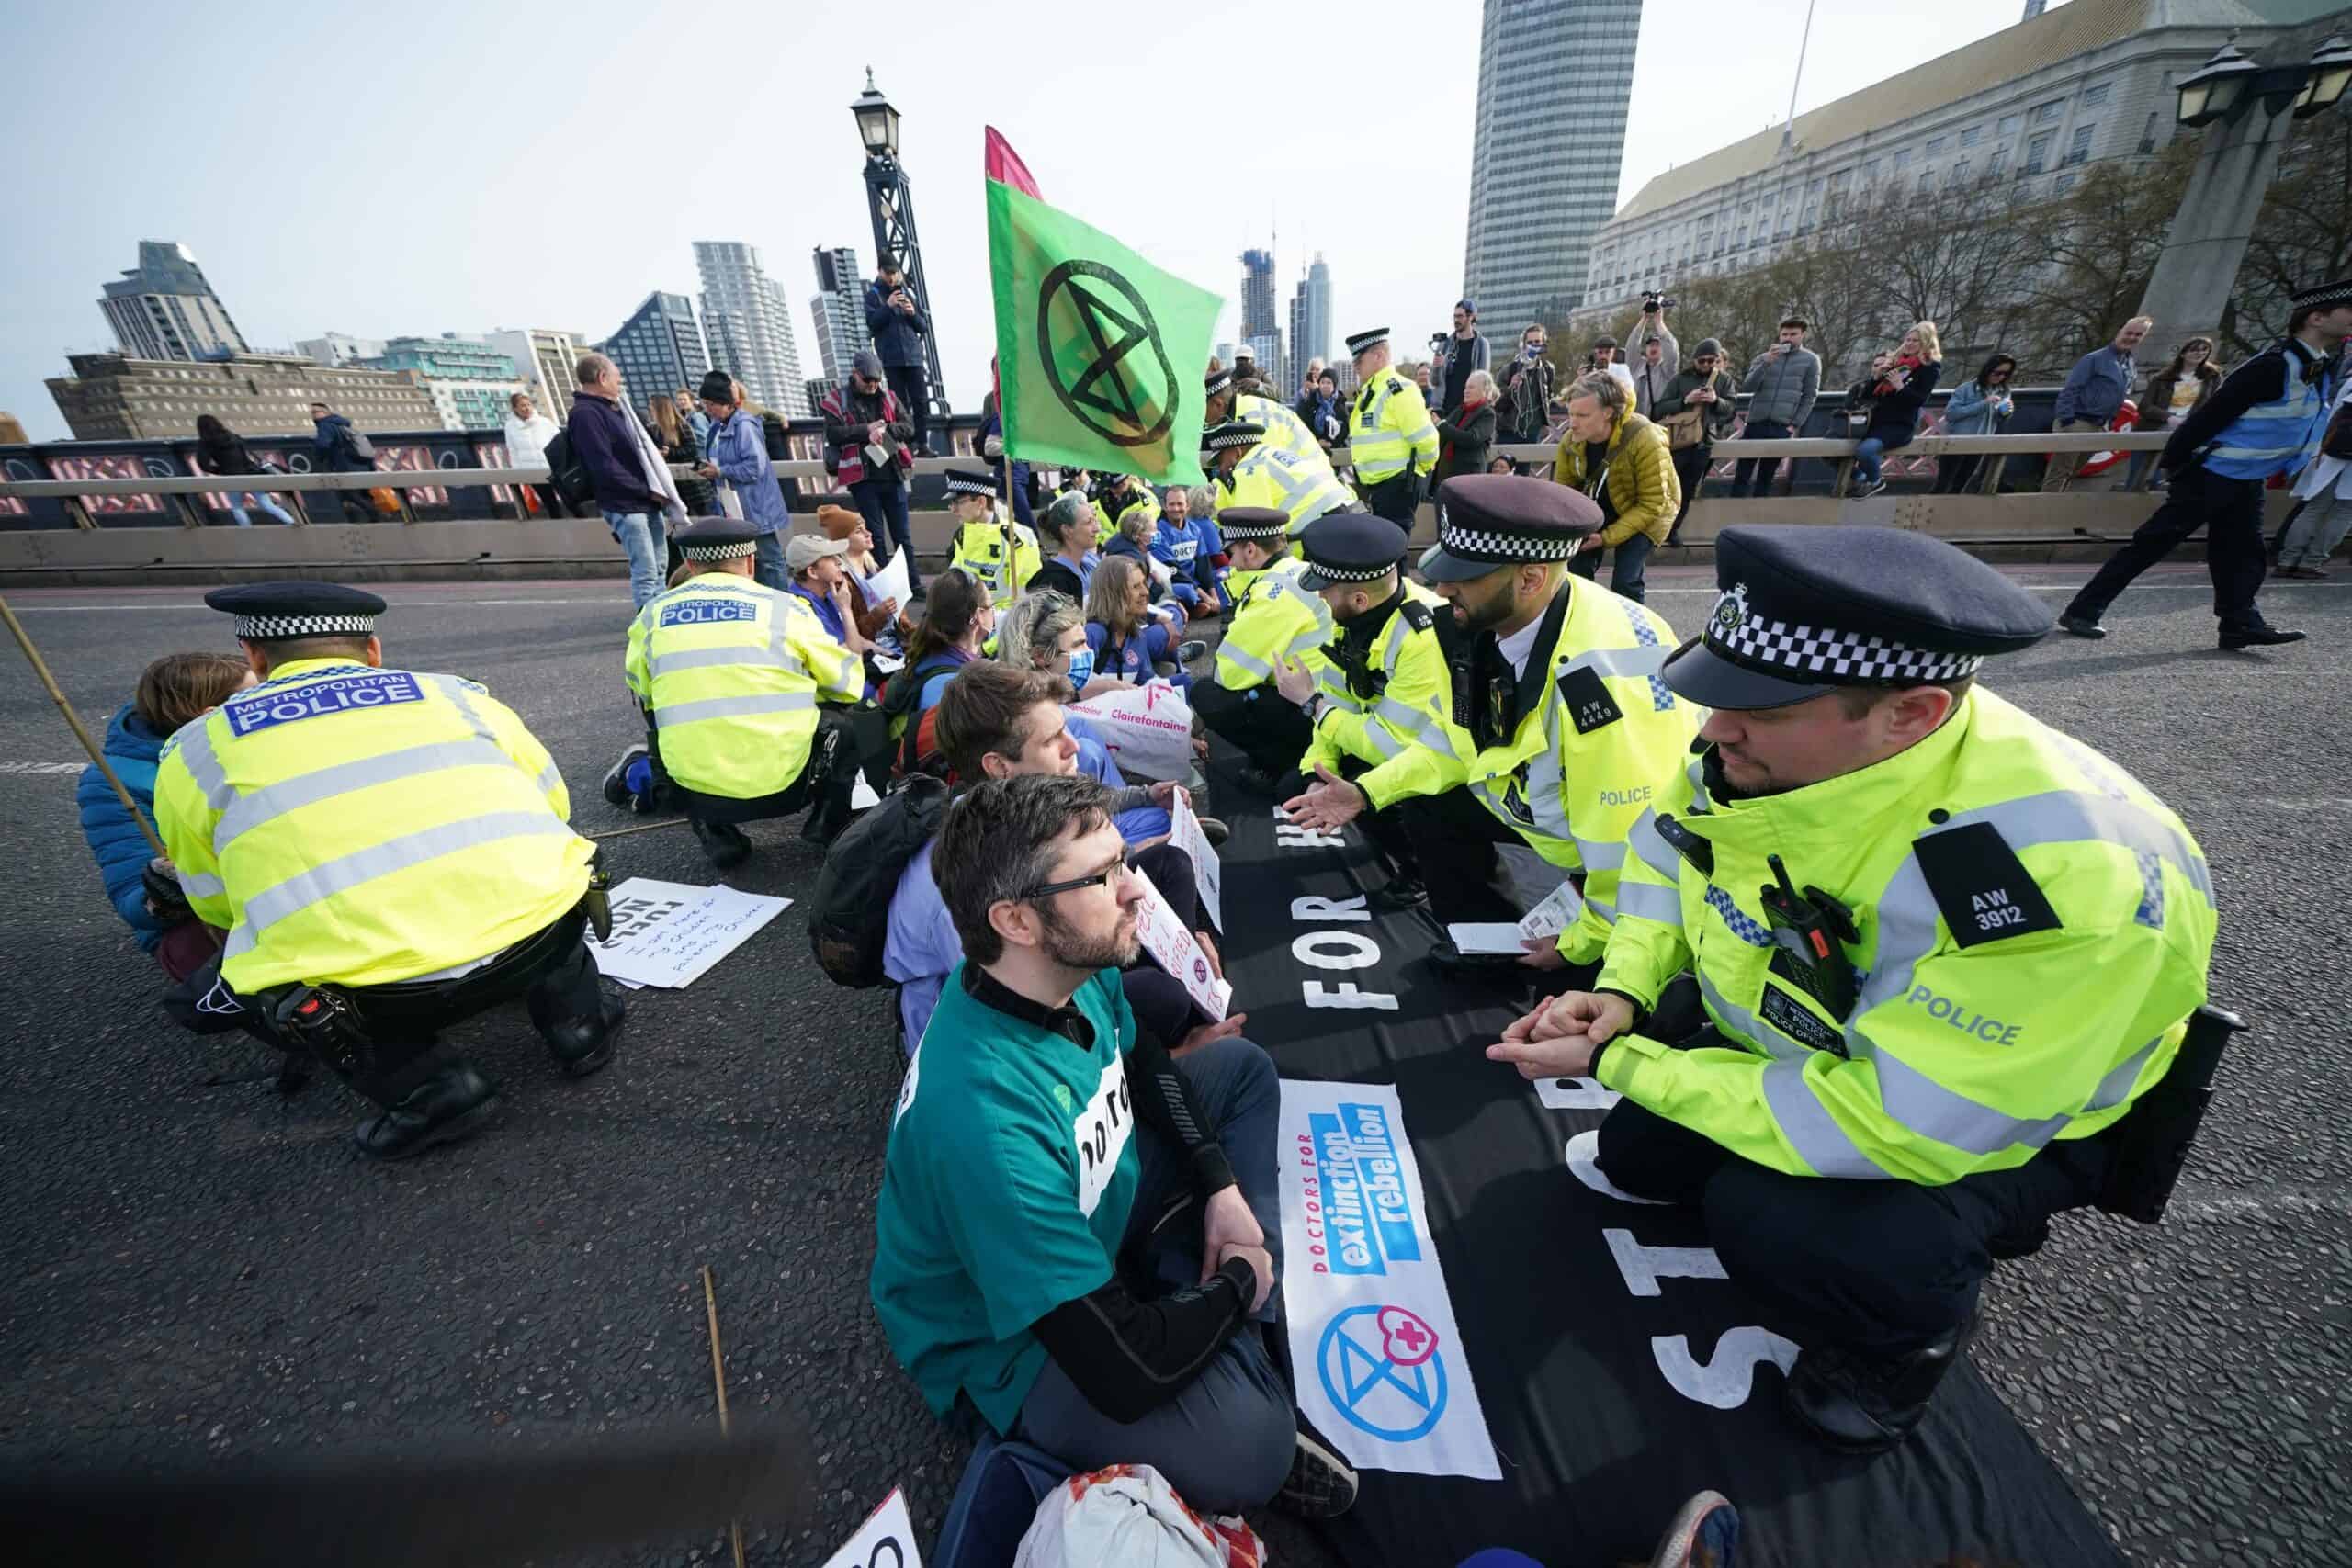 Extinction Rebellion ‘to temporarily shift away from public disruption’